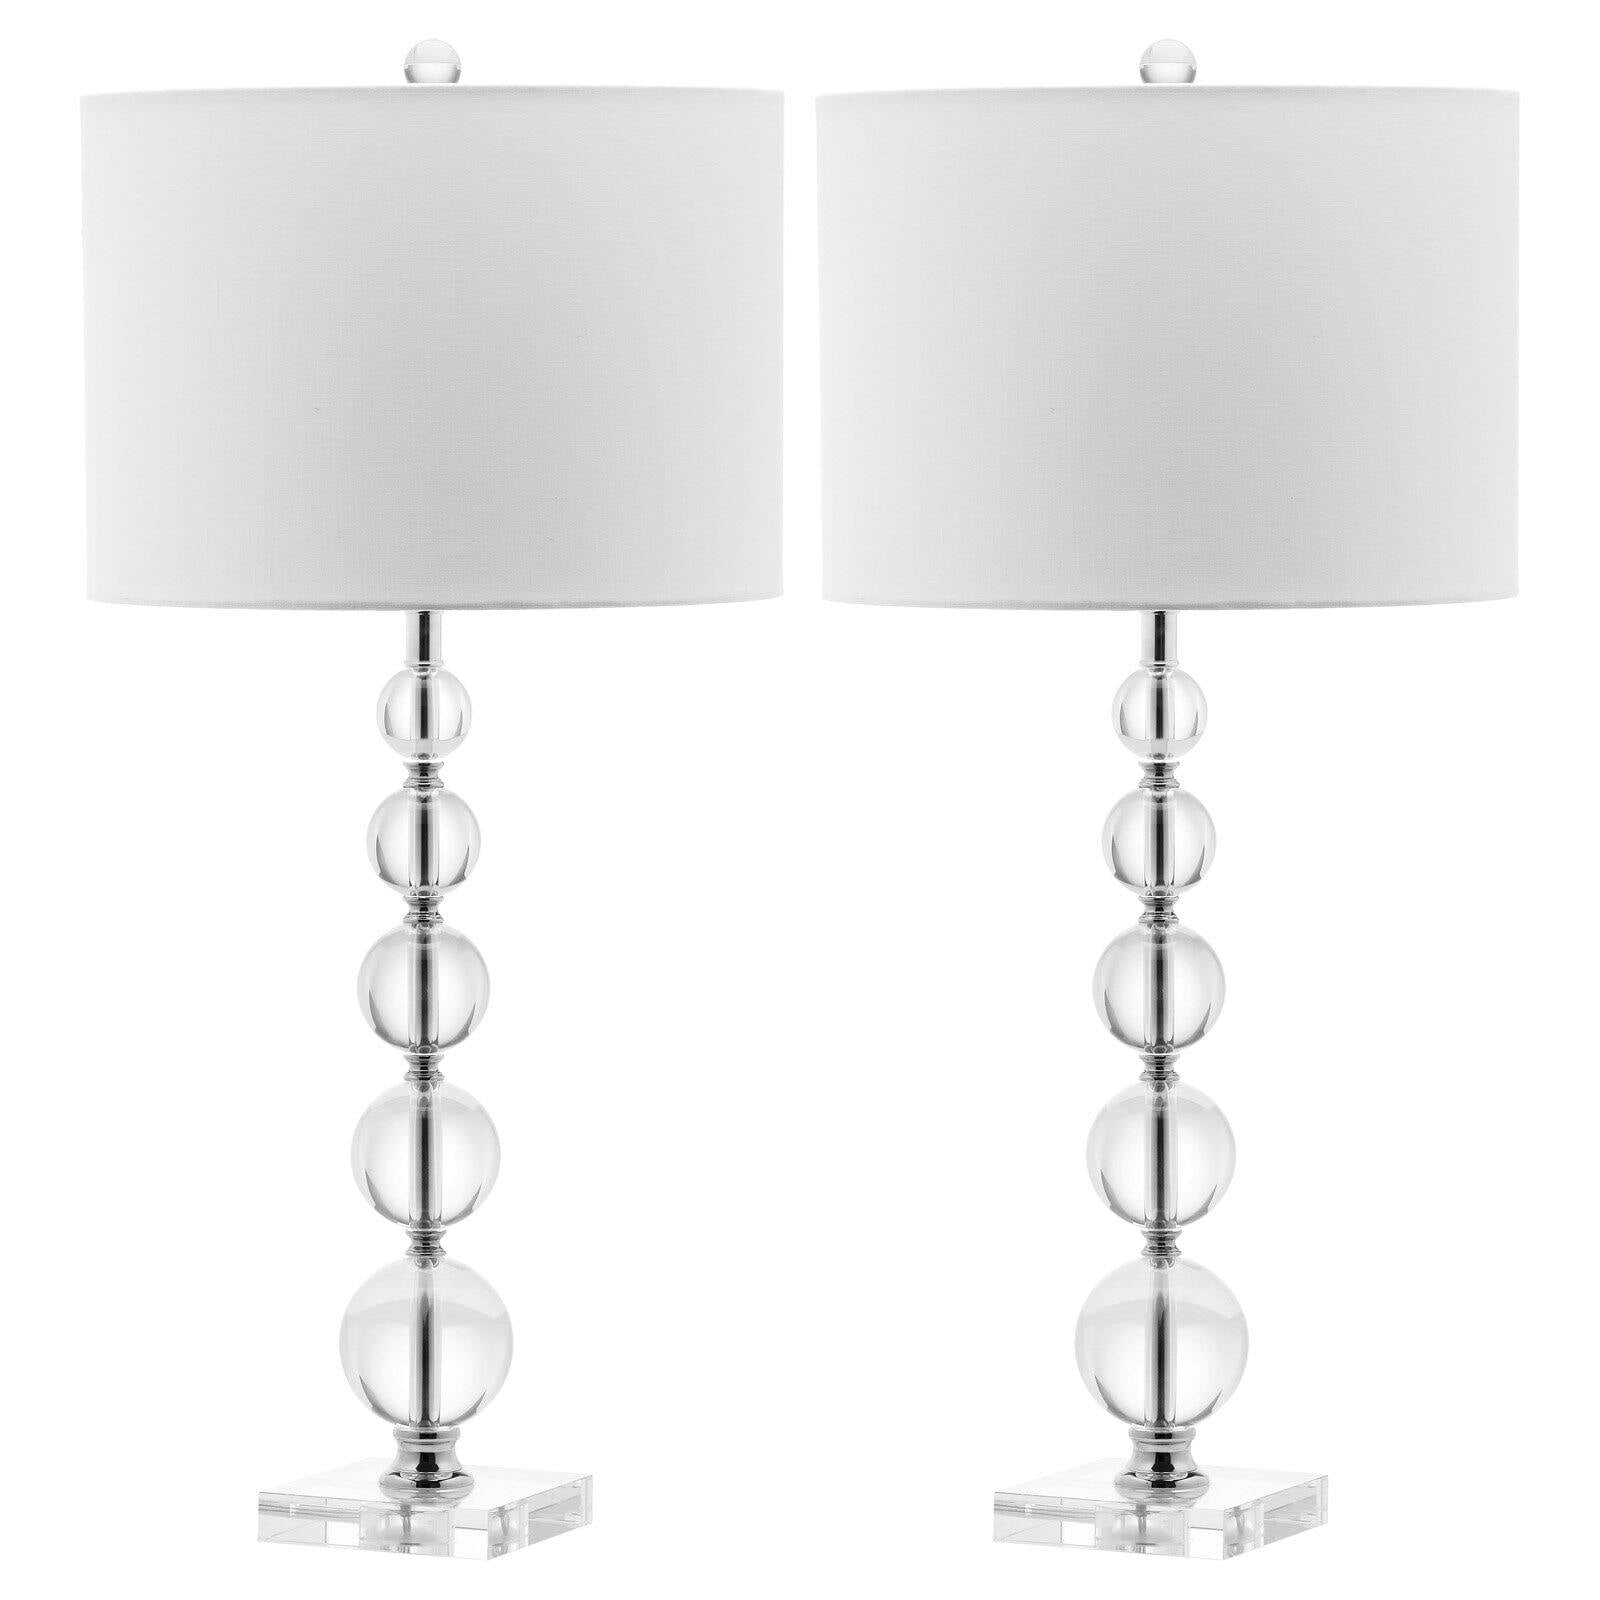 Stacked Crystal Ball Table Lamp Set, Safavieh Crystal Table Lamps